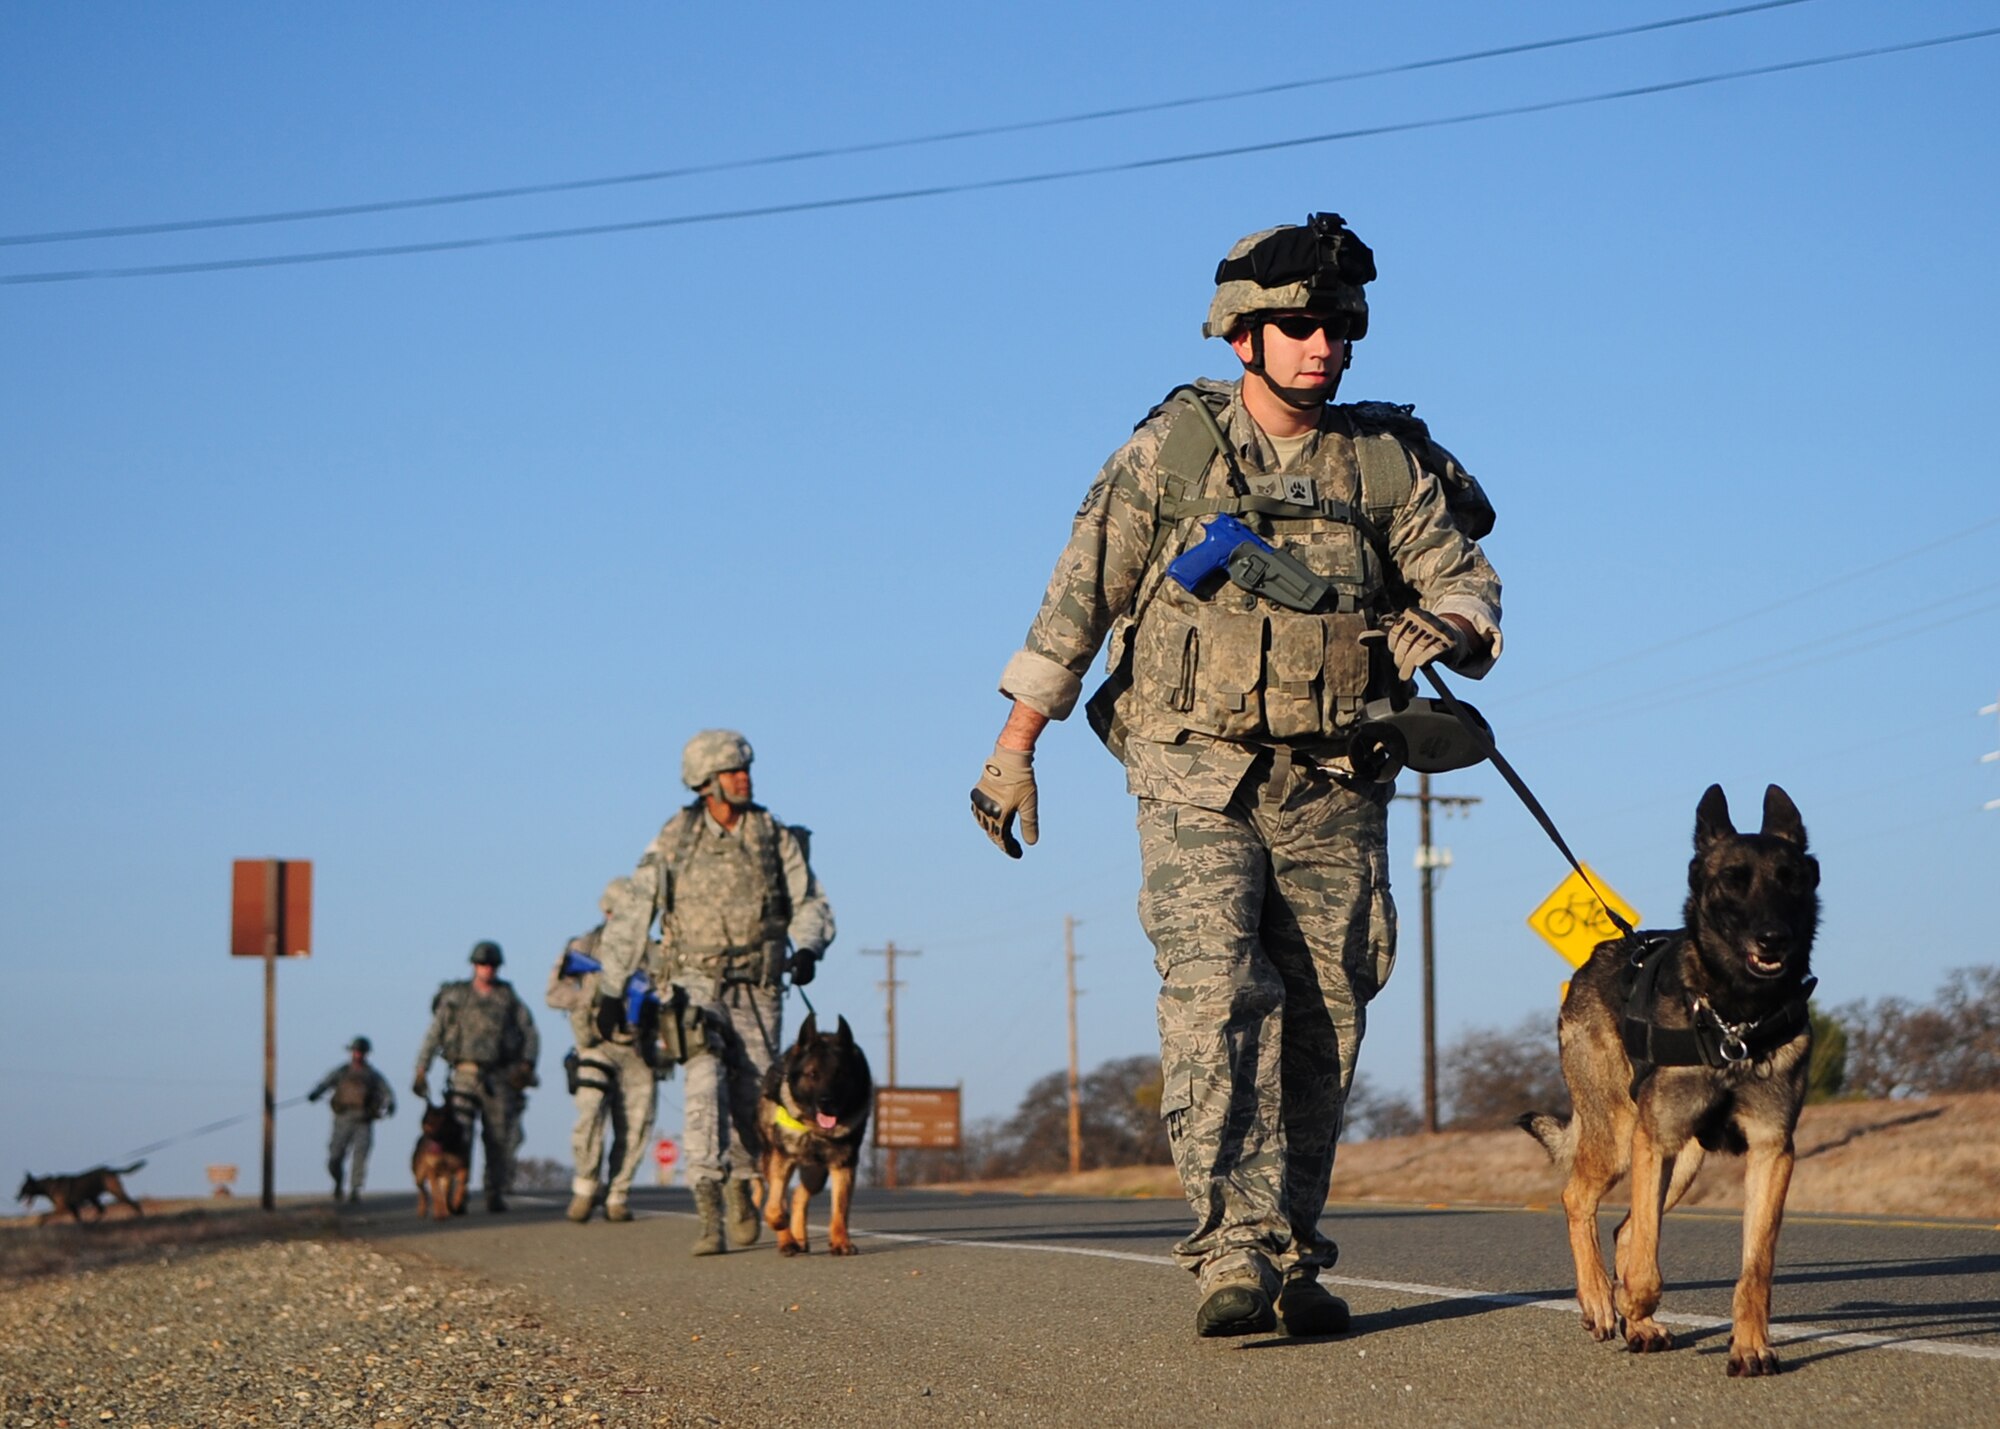 9th Security Forces Squadron military working dog handlers march along Warren Shingle Rd. on Beale AFB during training Jan. 9, 2012. By going on long ruck marches across base and training together outside their kennels, these teams prepare for their mission to support combatant commanders around the world. (U.S Air Force photo by Senior Airman Shawn Nickel/Released)